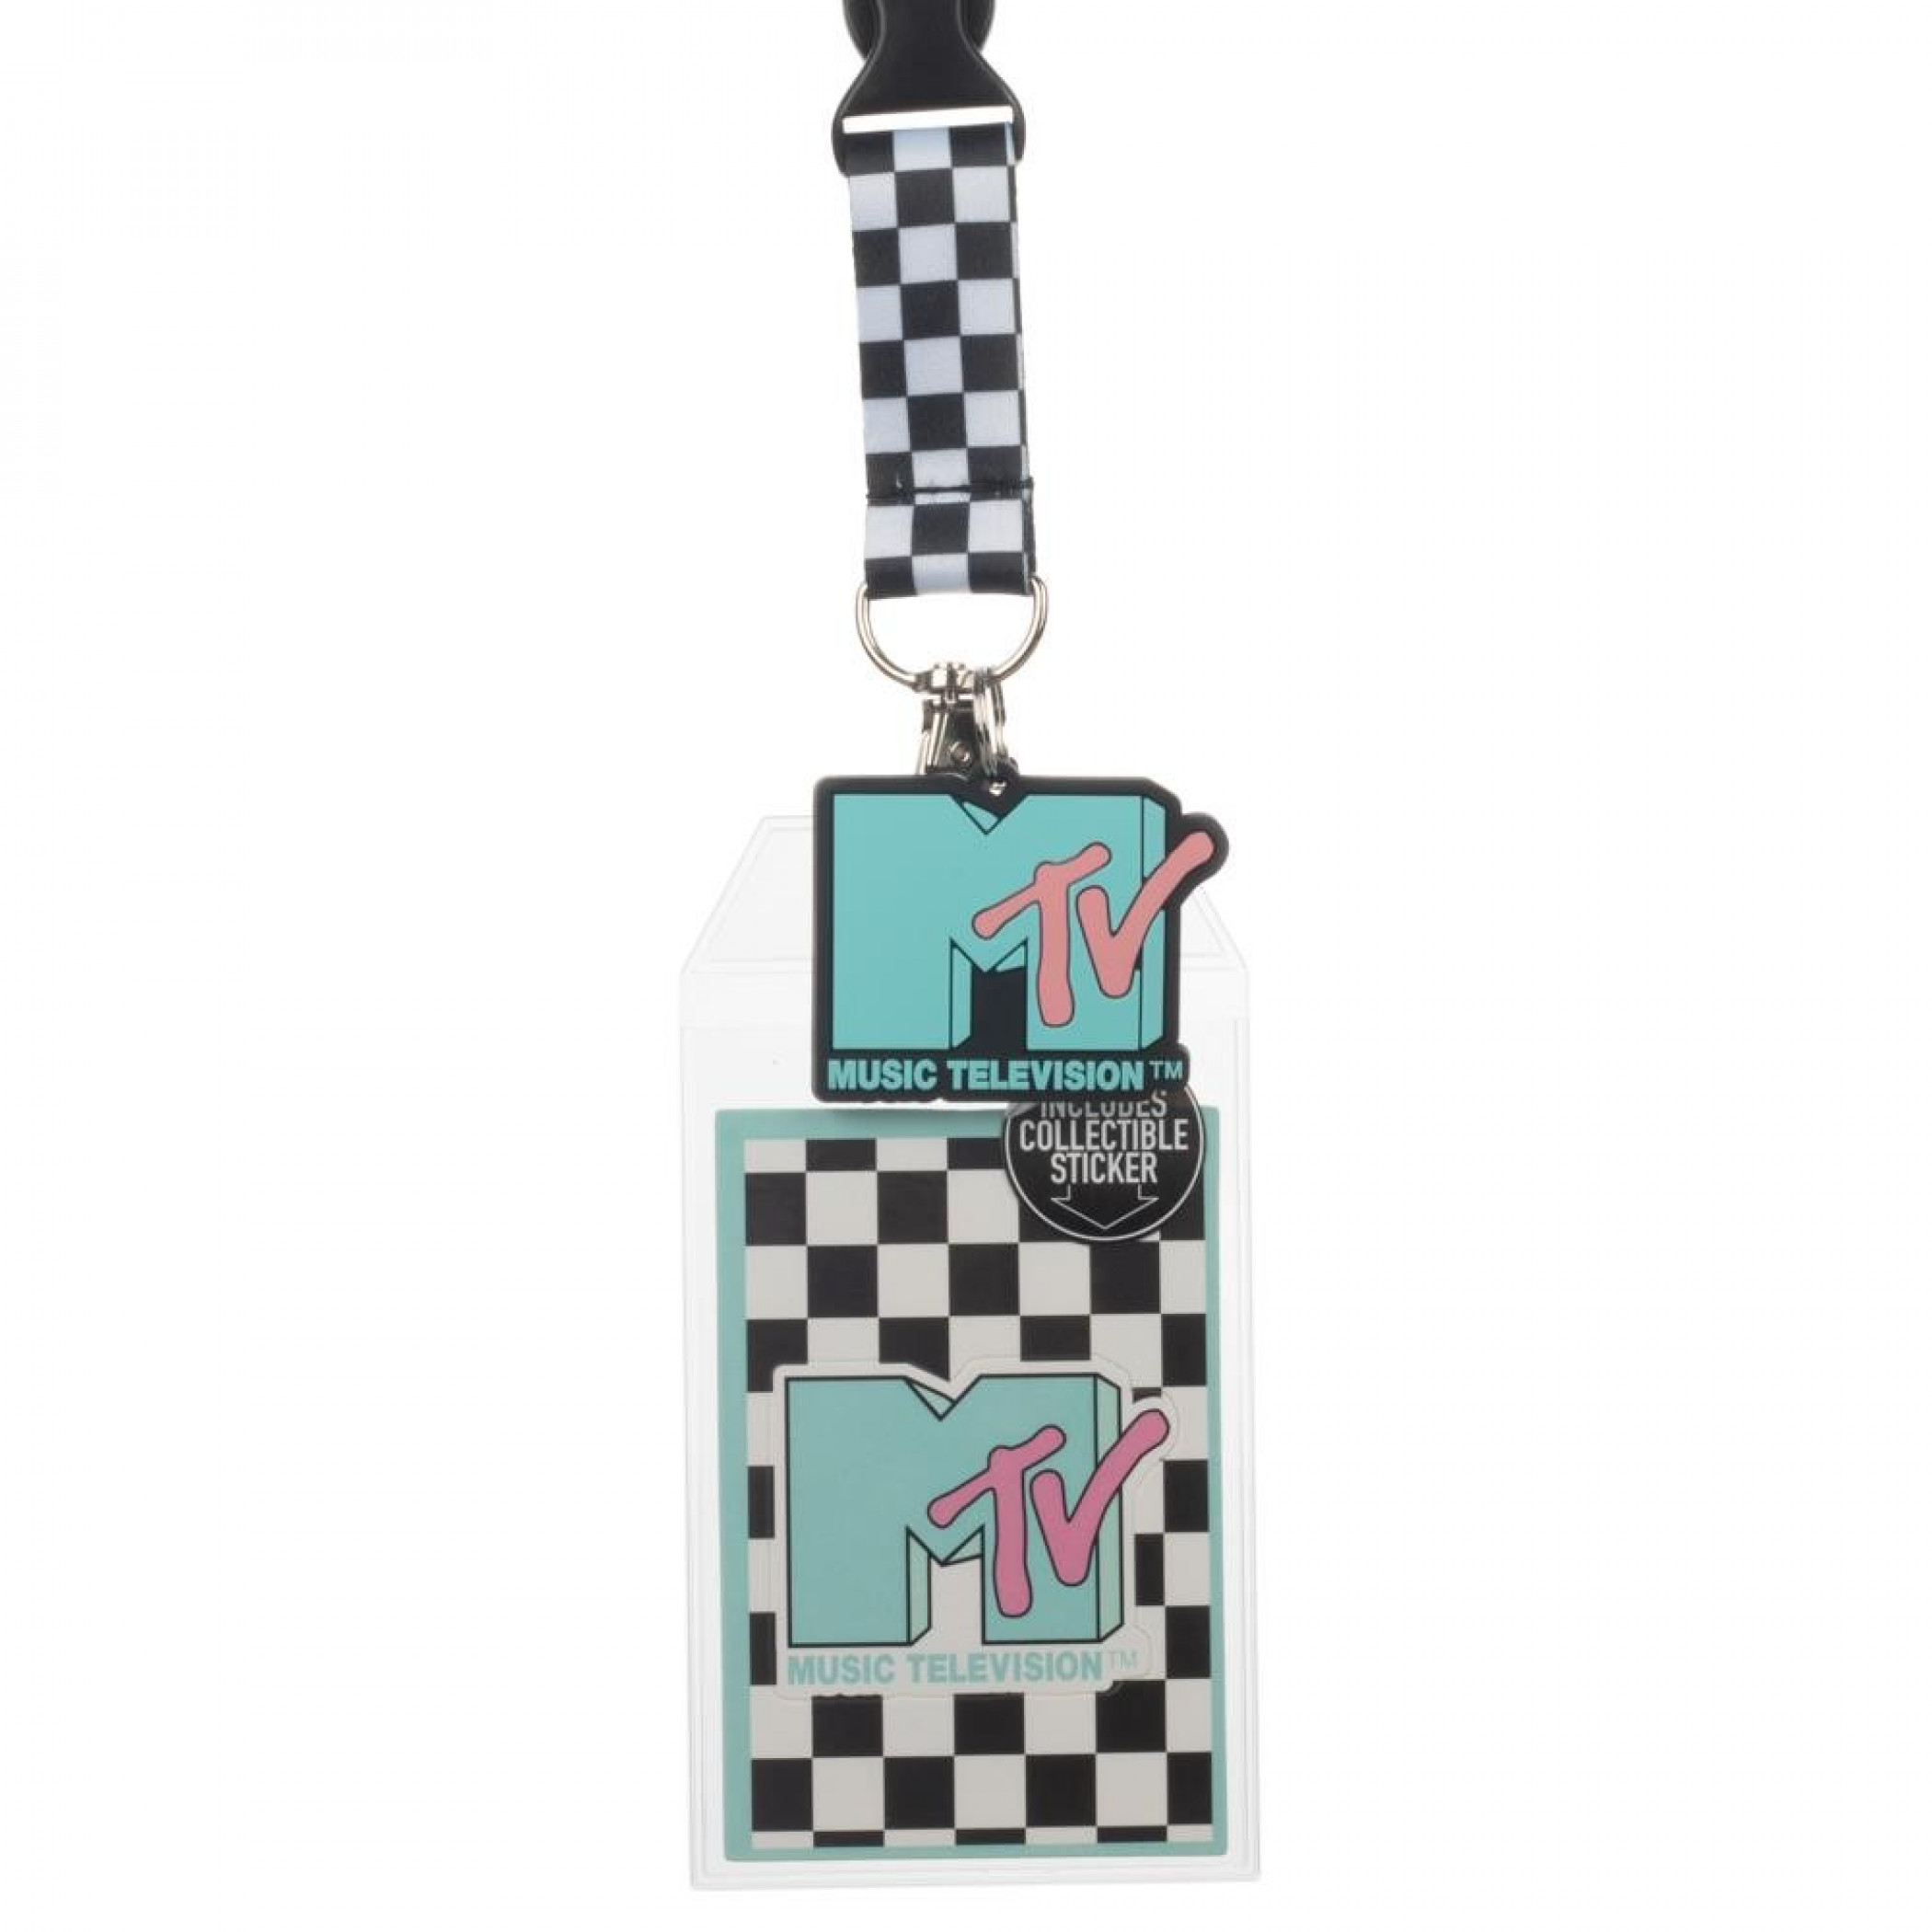 MTV Repeating Pattern Lanyard with Charm and Sticker